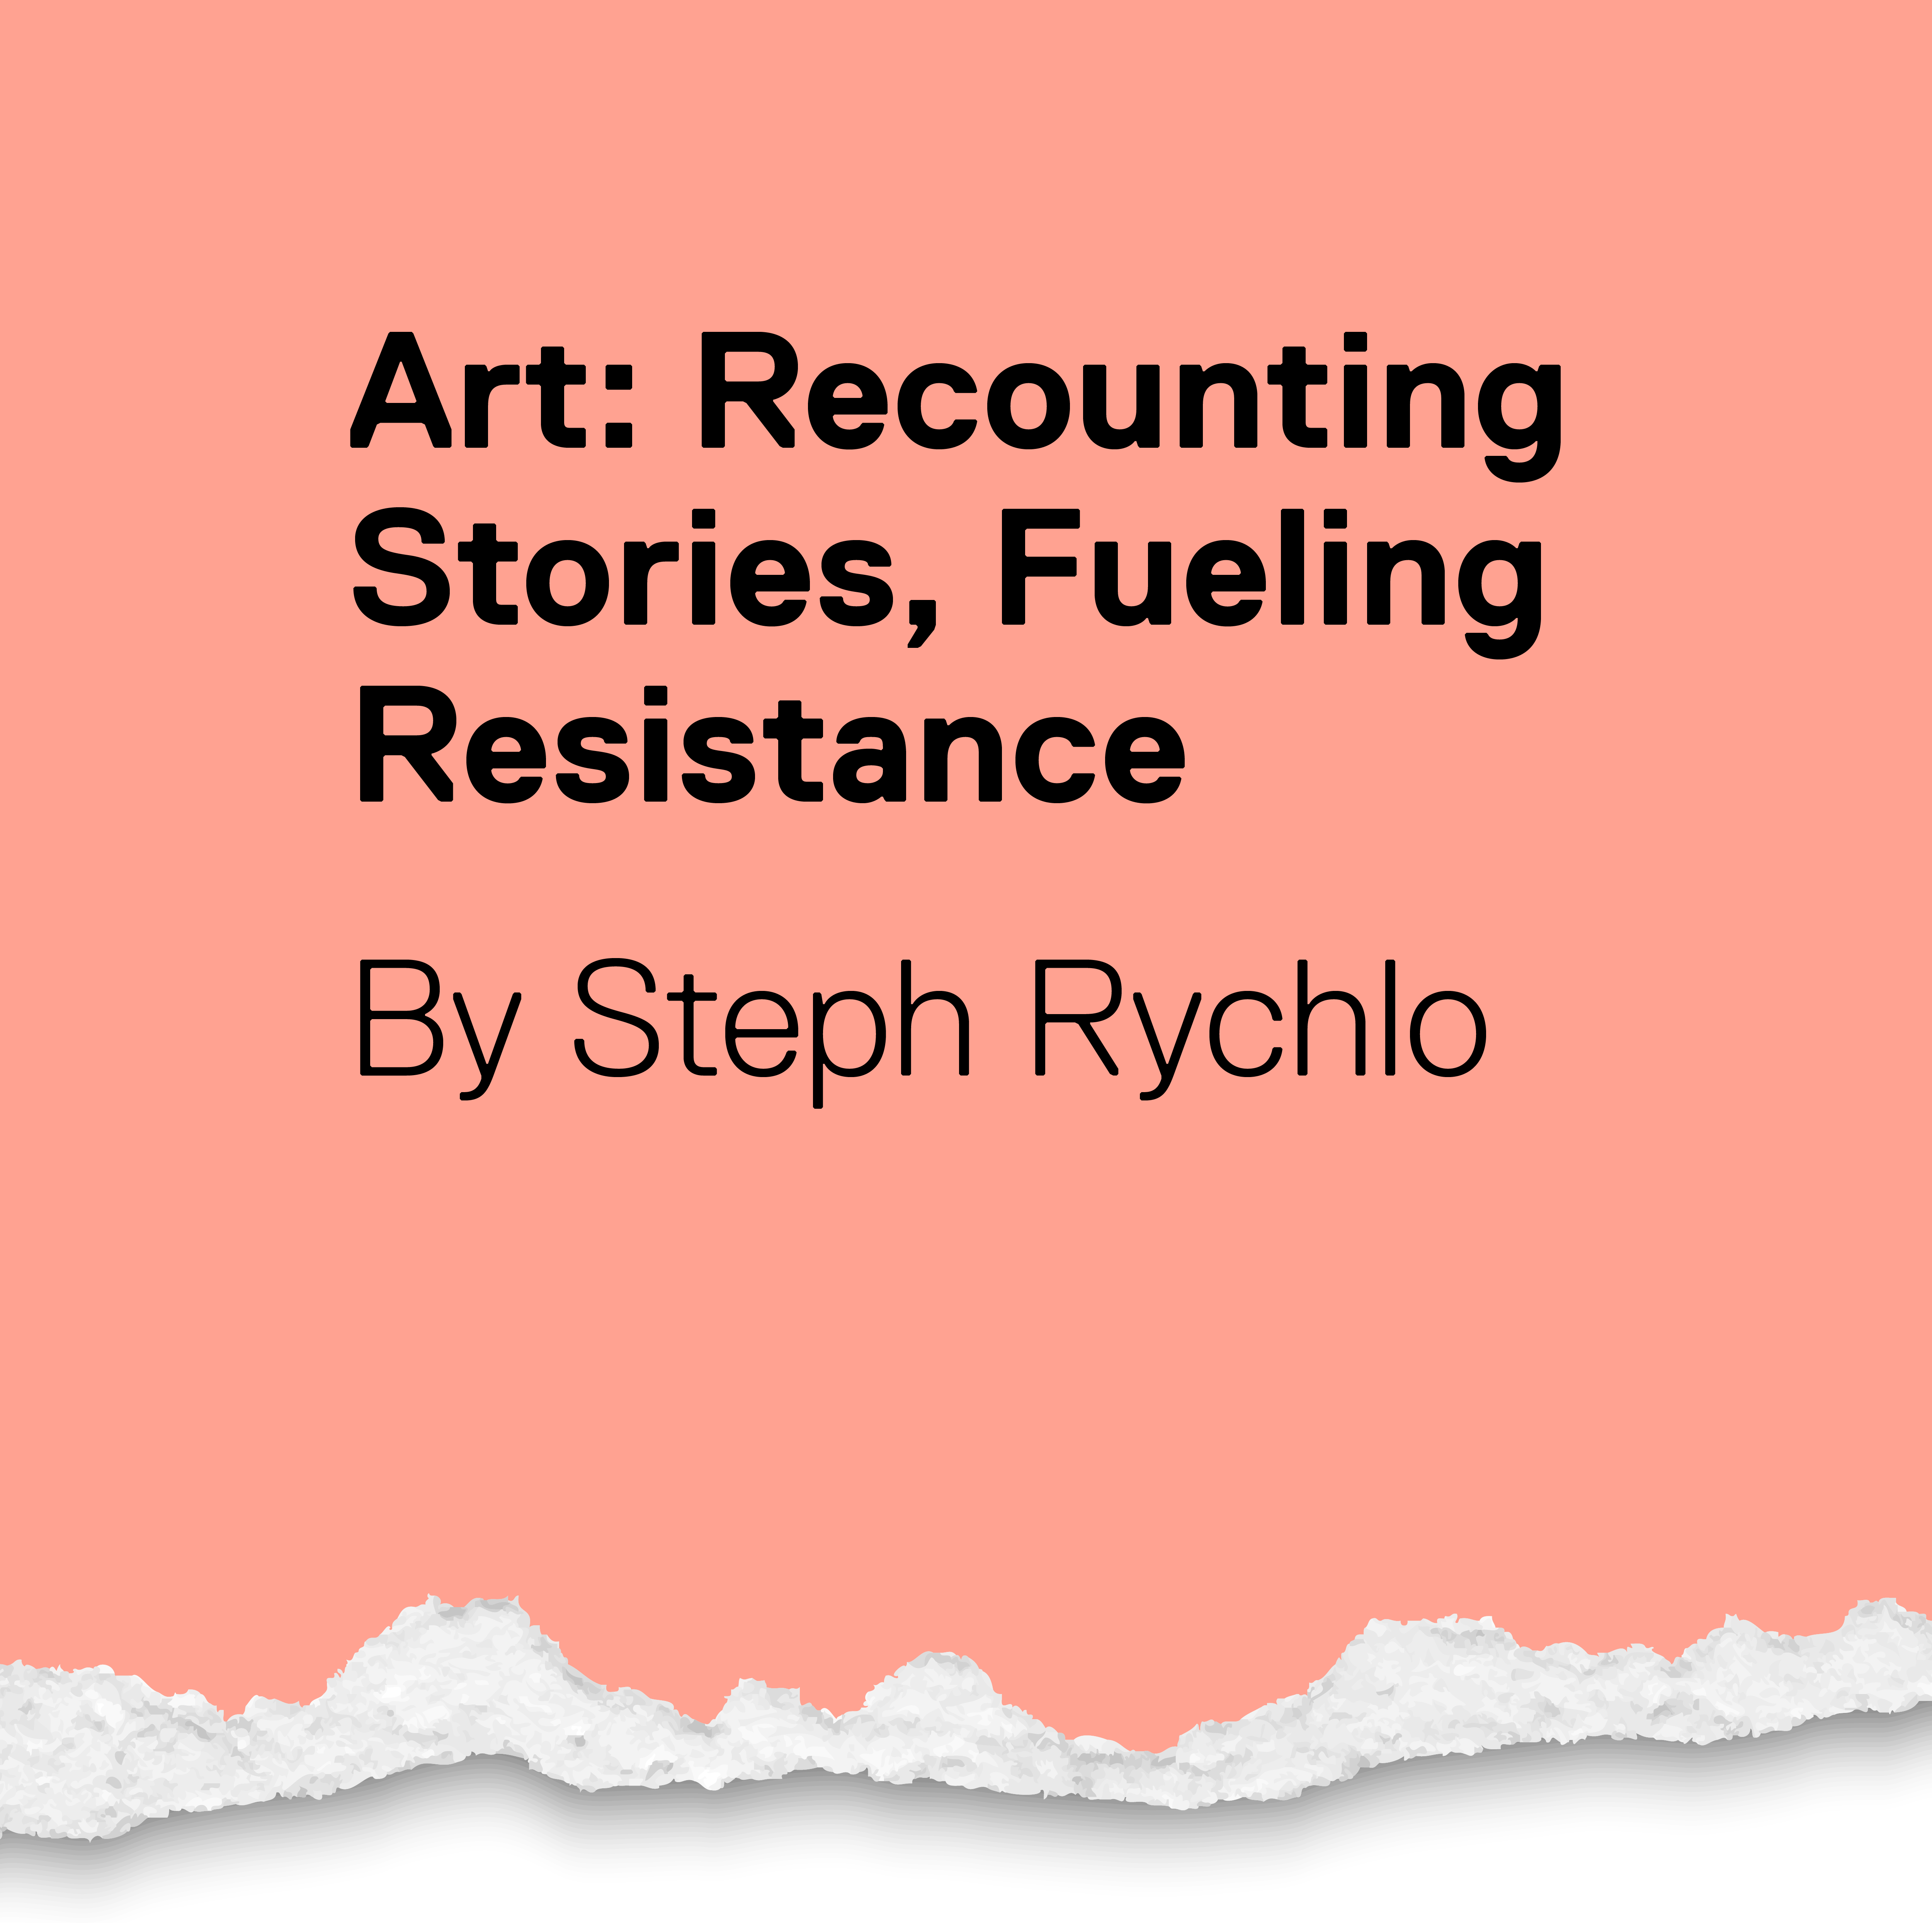 Art: Recounting Stories, Fueling Resistance. By Steph Rychlo.